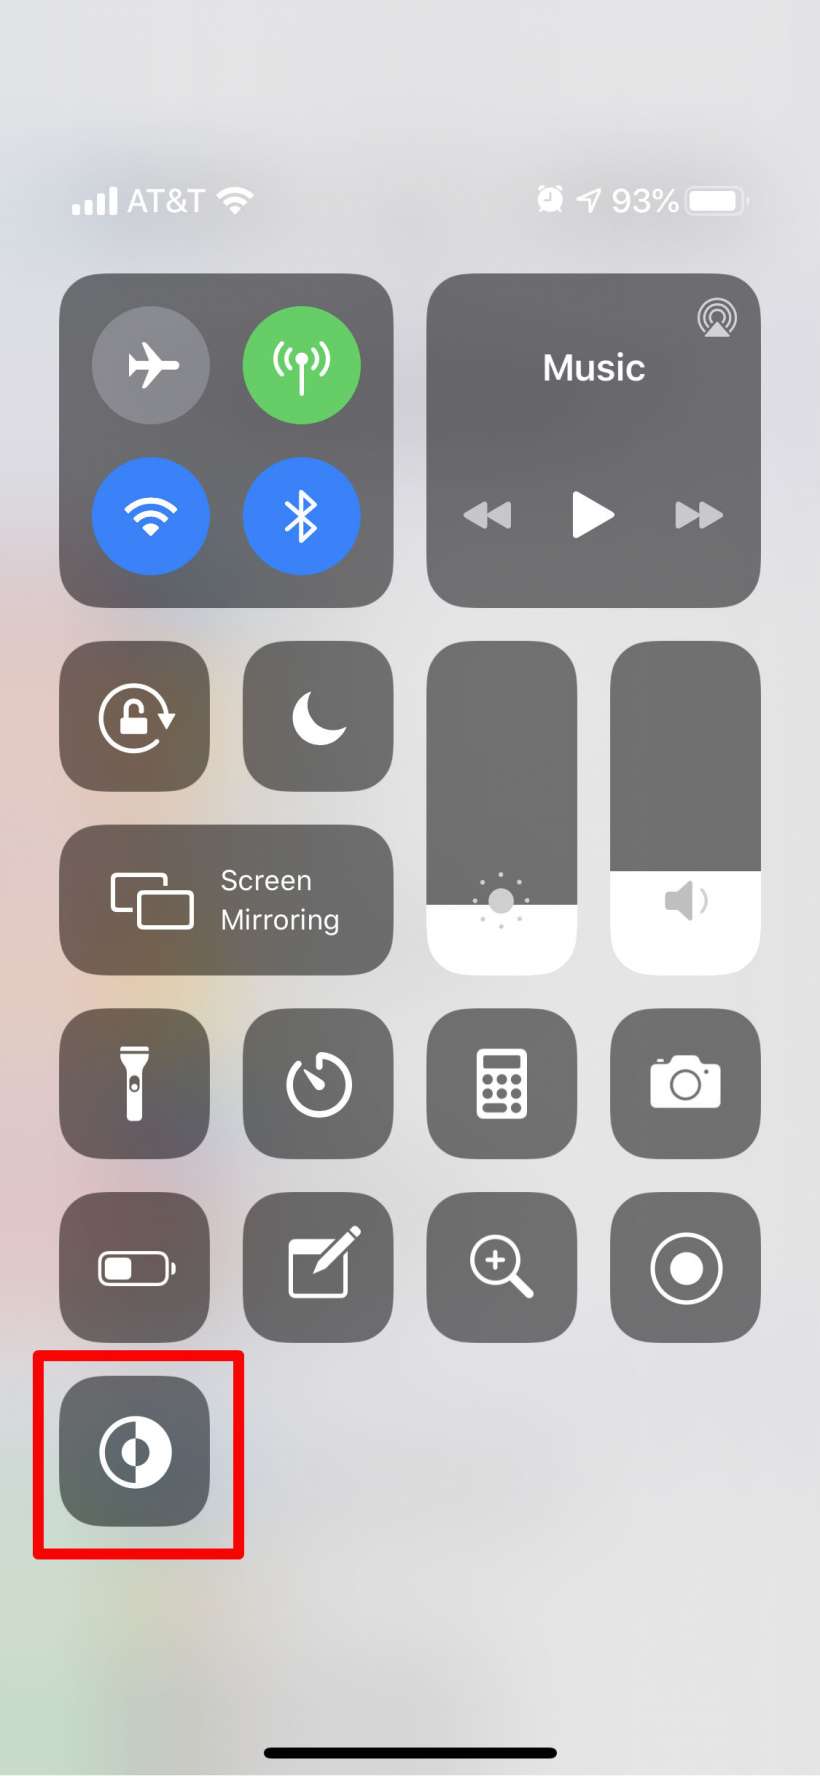 How to add a dark mode button to the Control Center on iPhone and iPad.